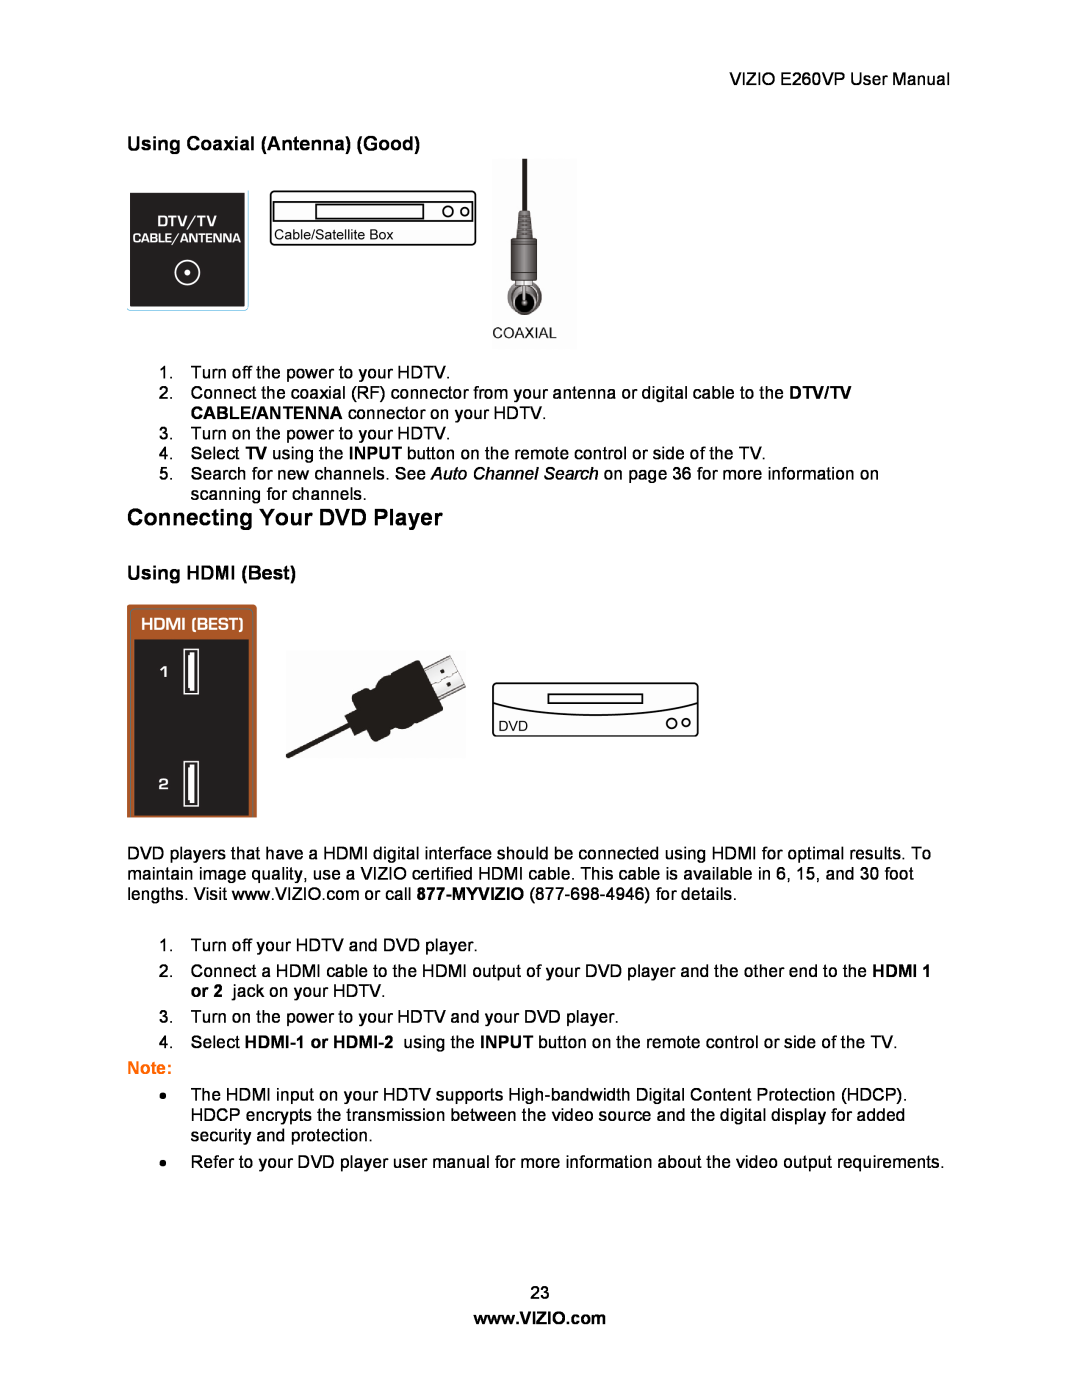 Vizio E260VP user manual Connecting Your DVD Player, Using Coaxial Antenna Good, Using HDMI Best 